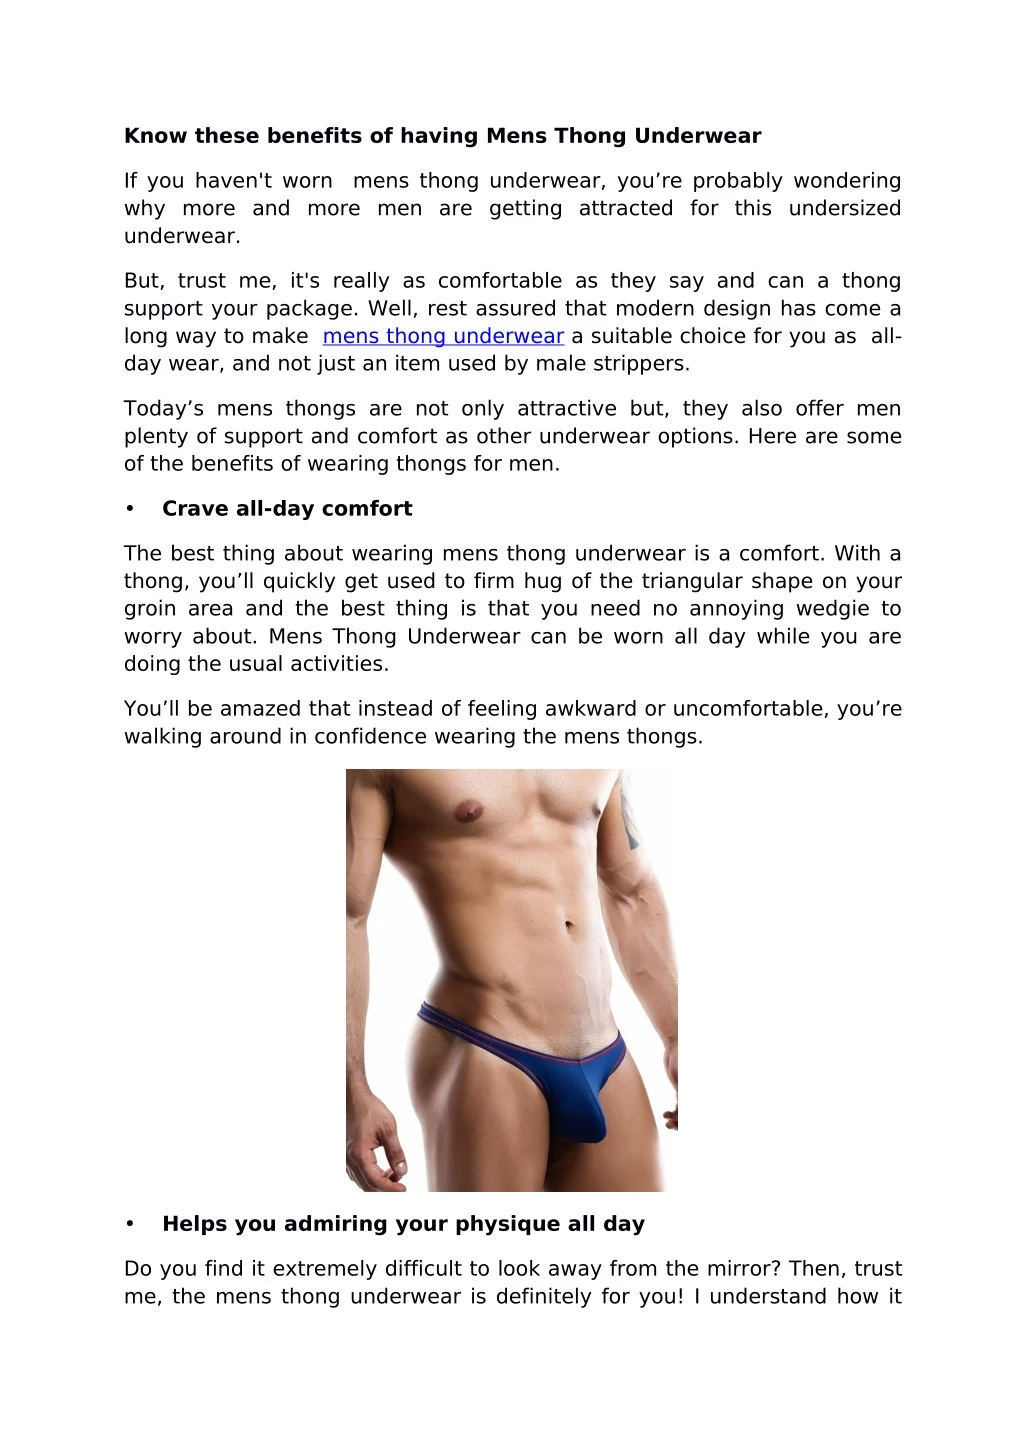 know these benefits of having mens thong underwear